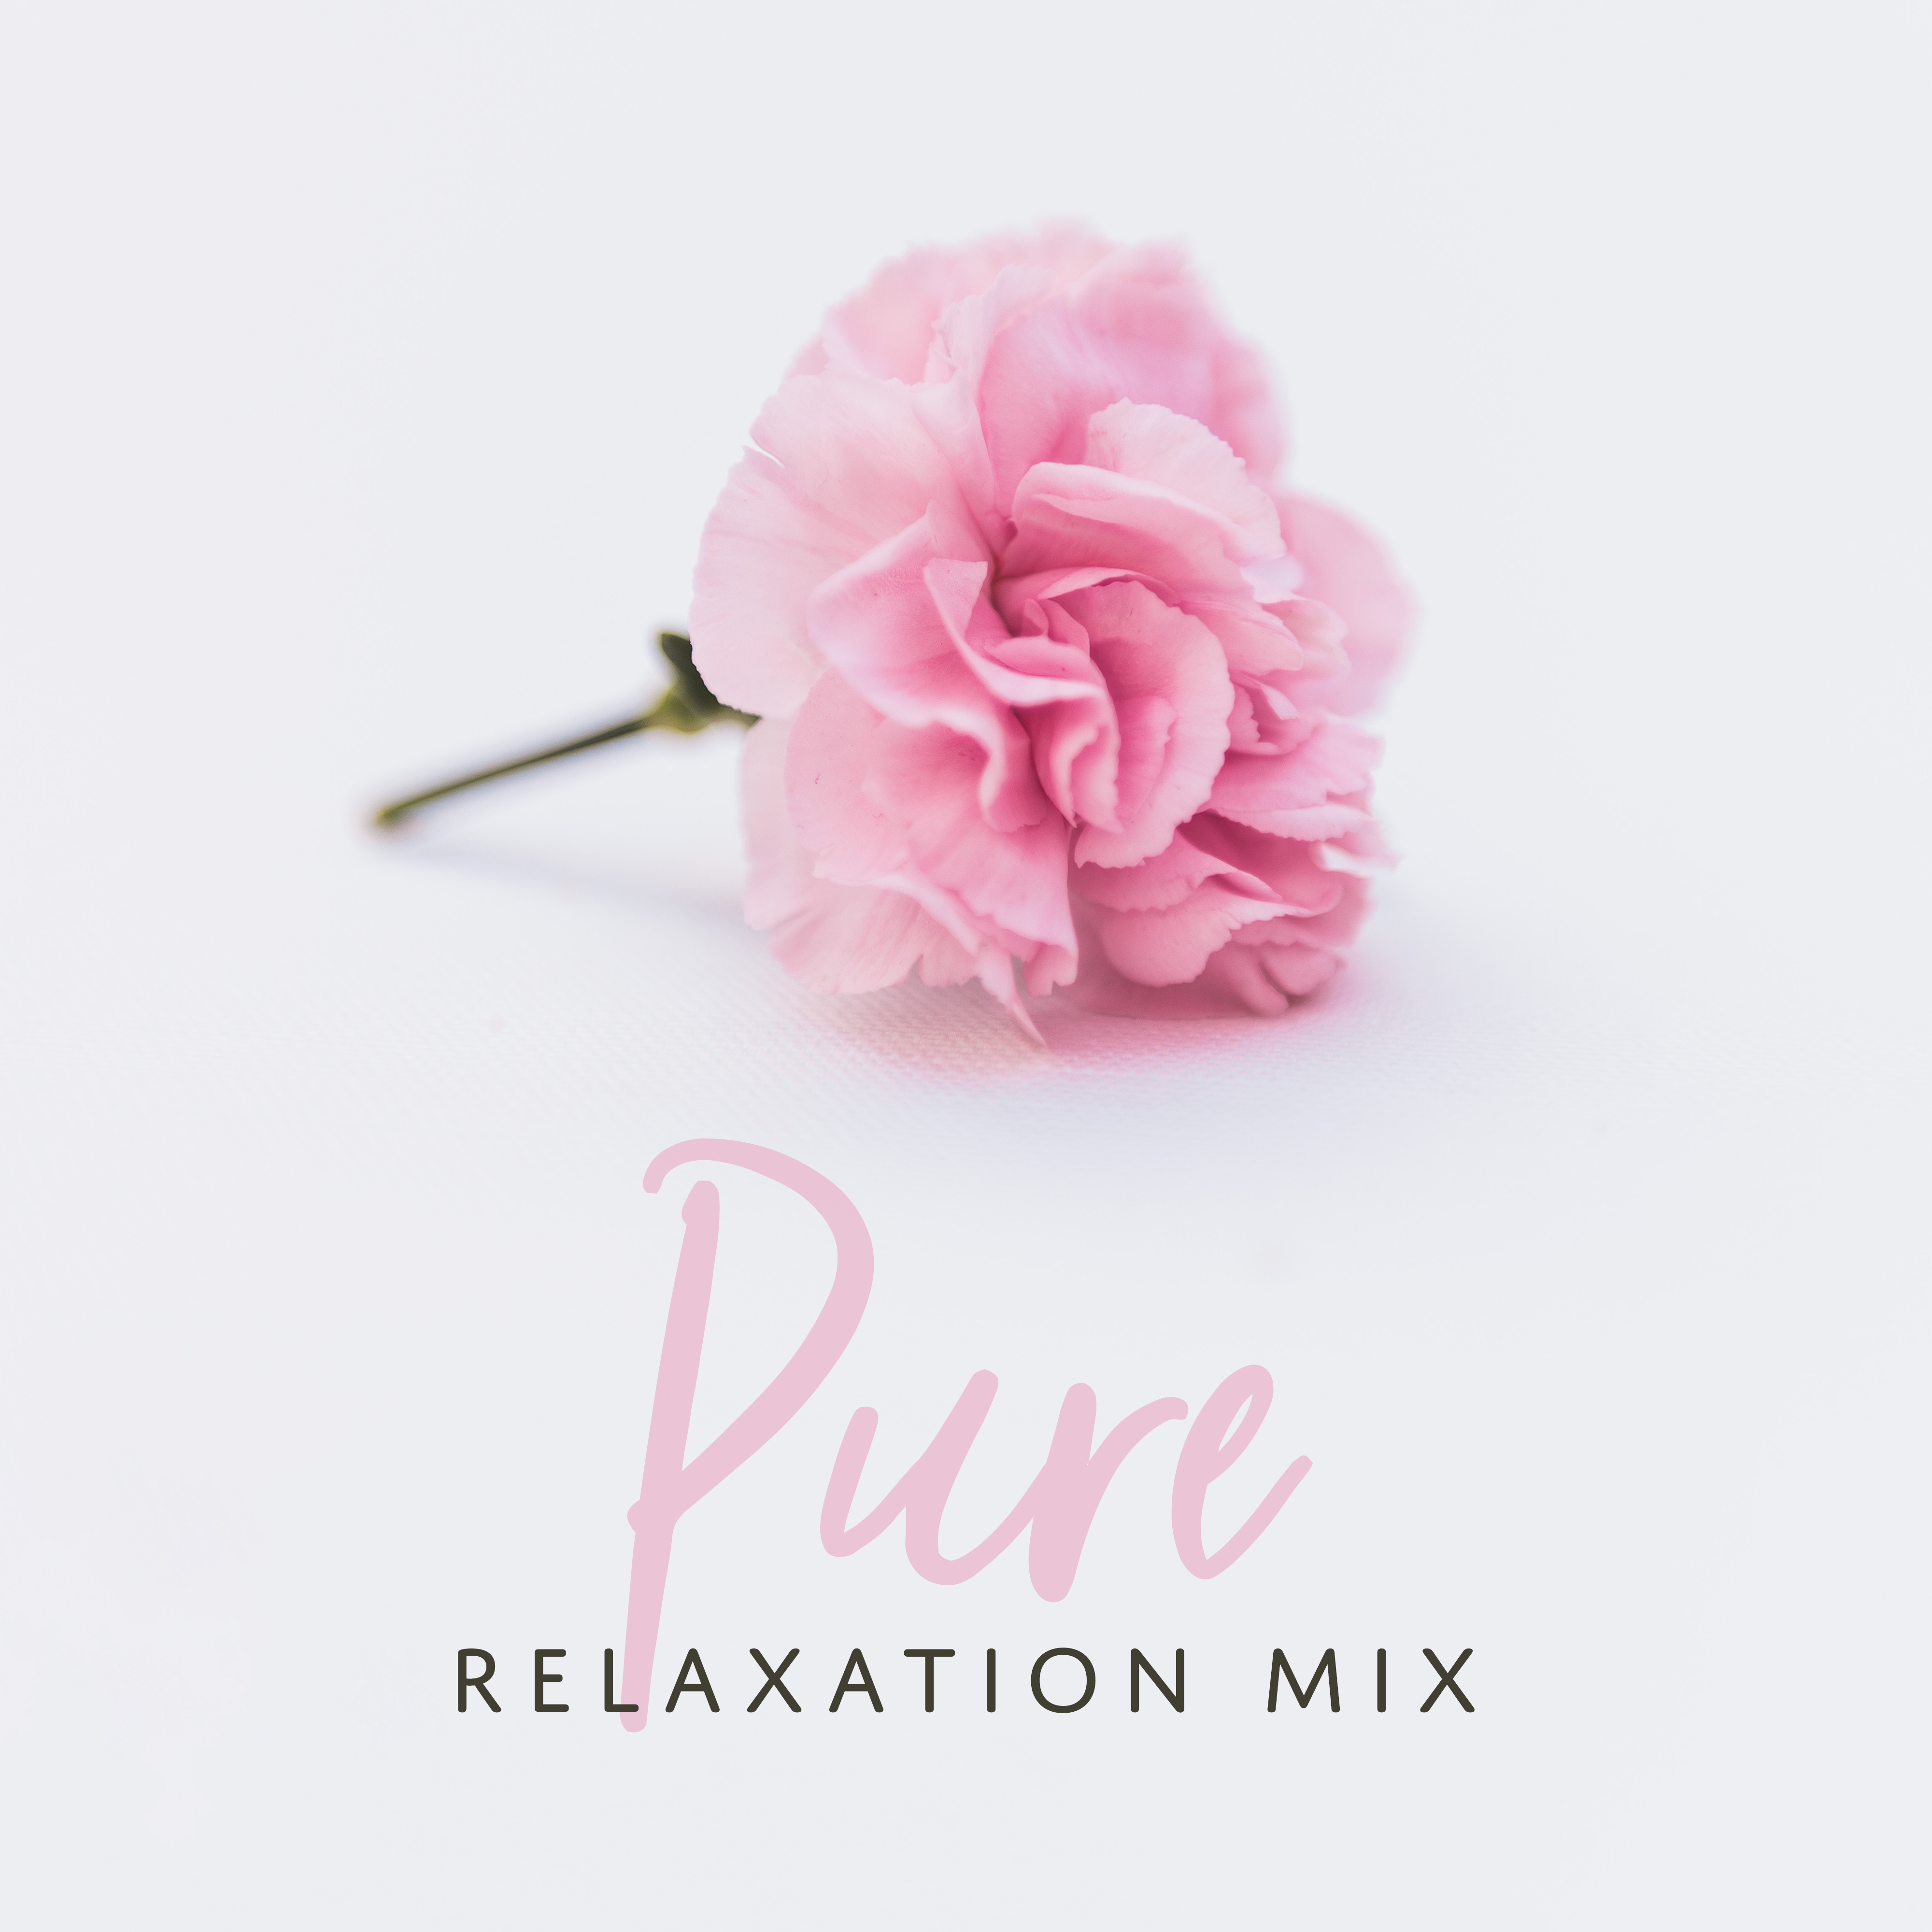 Pure Relaxation Mix - Peaceful Melodies for Relaxation, Nature Sounds to Calm Down